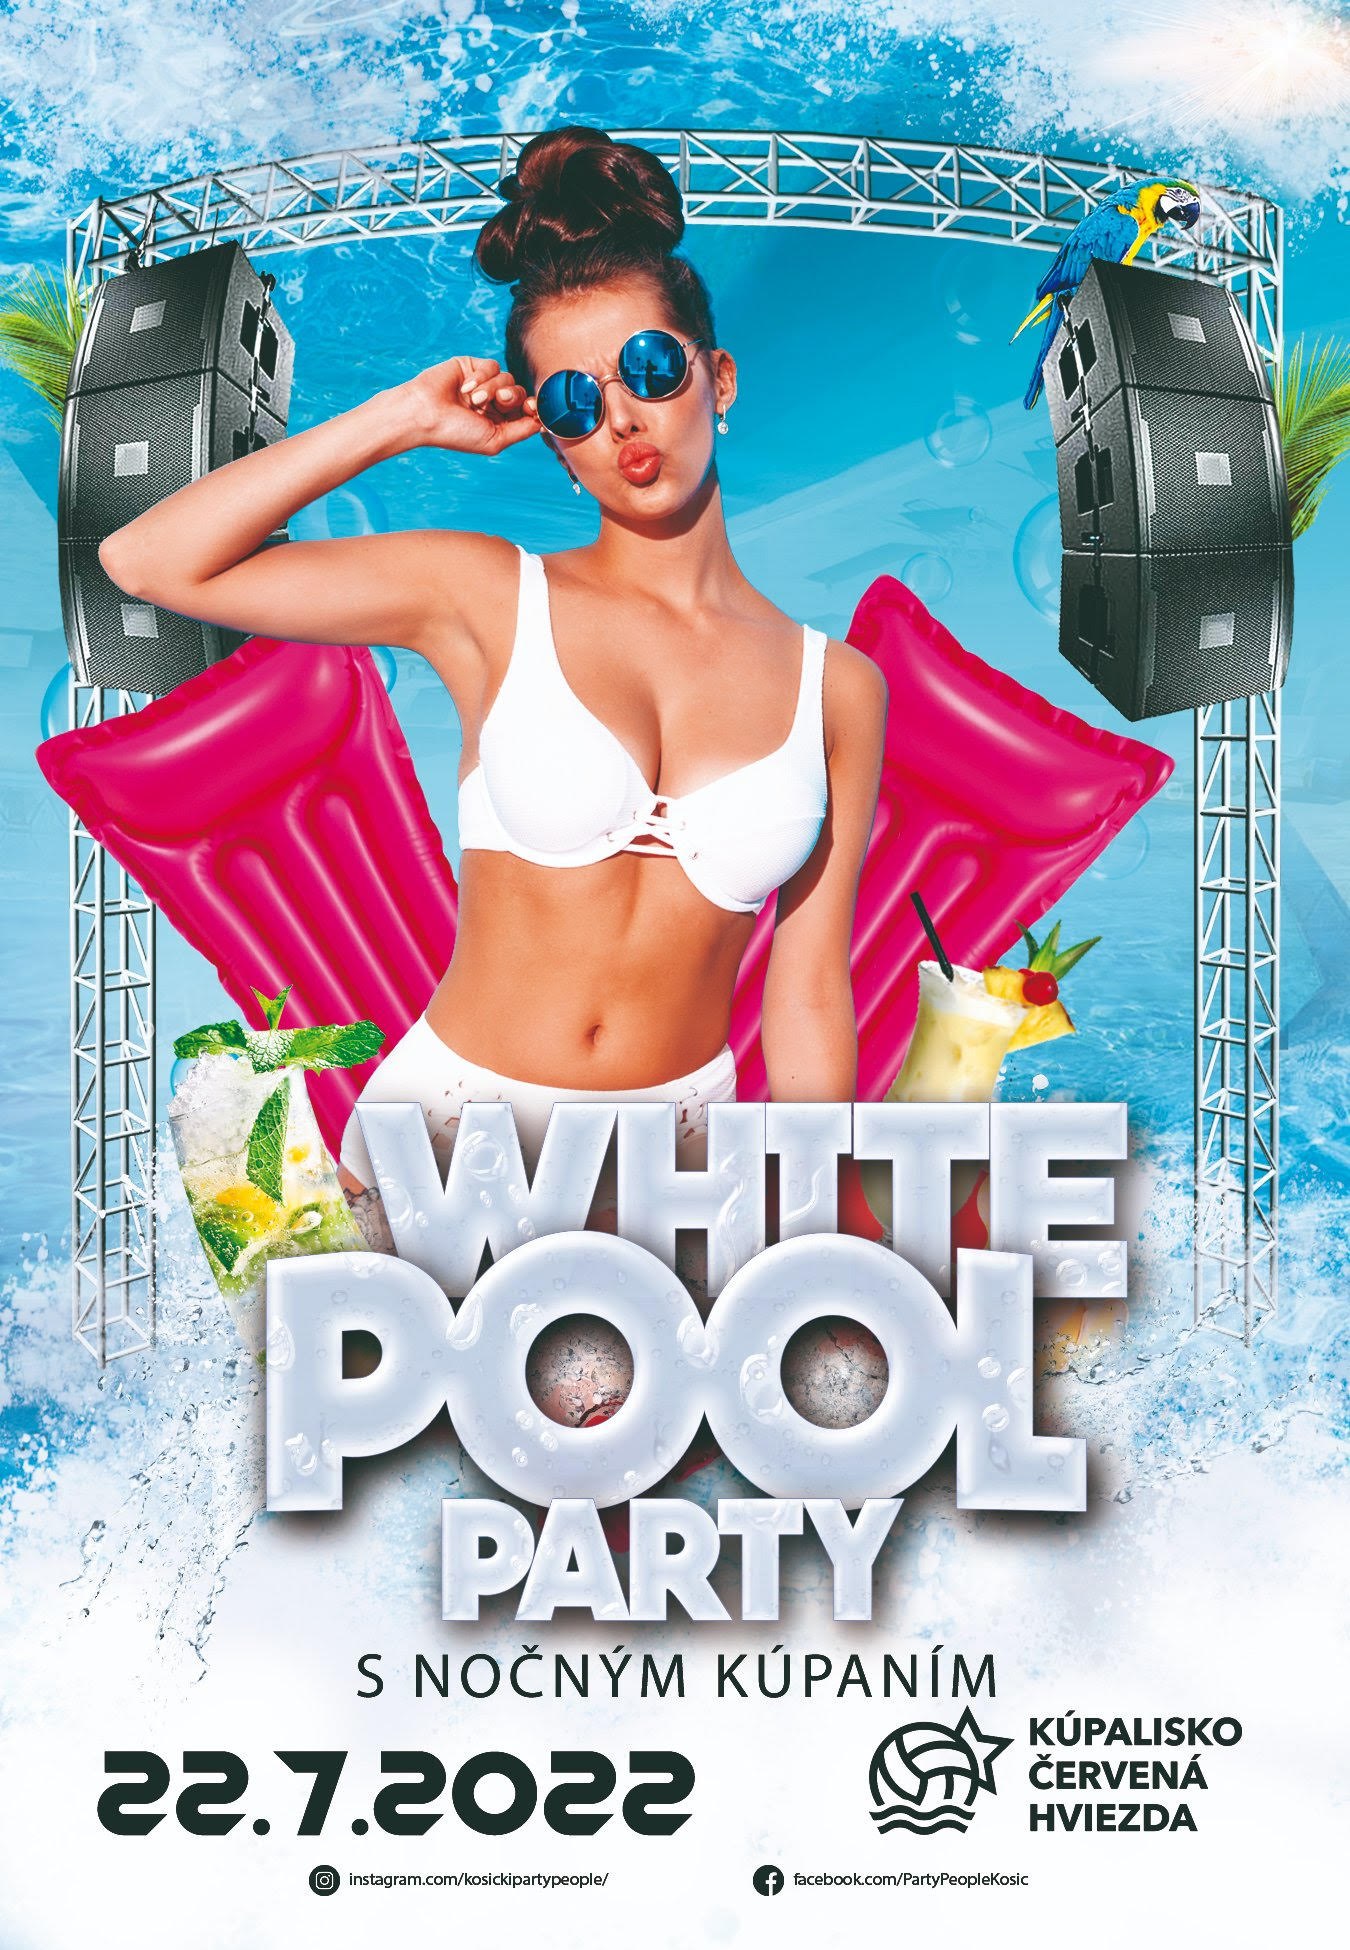 You are currently viewing White pool party 22.7. 2022